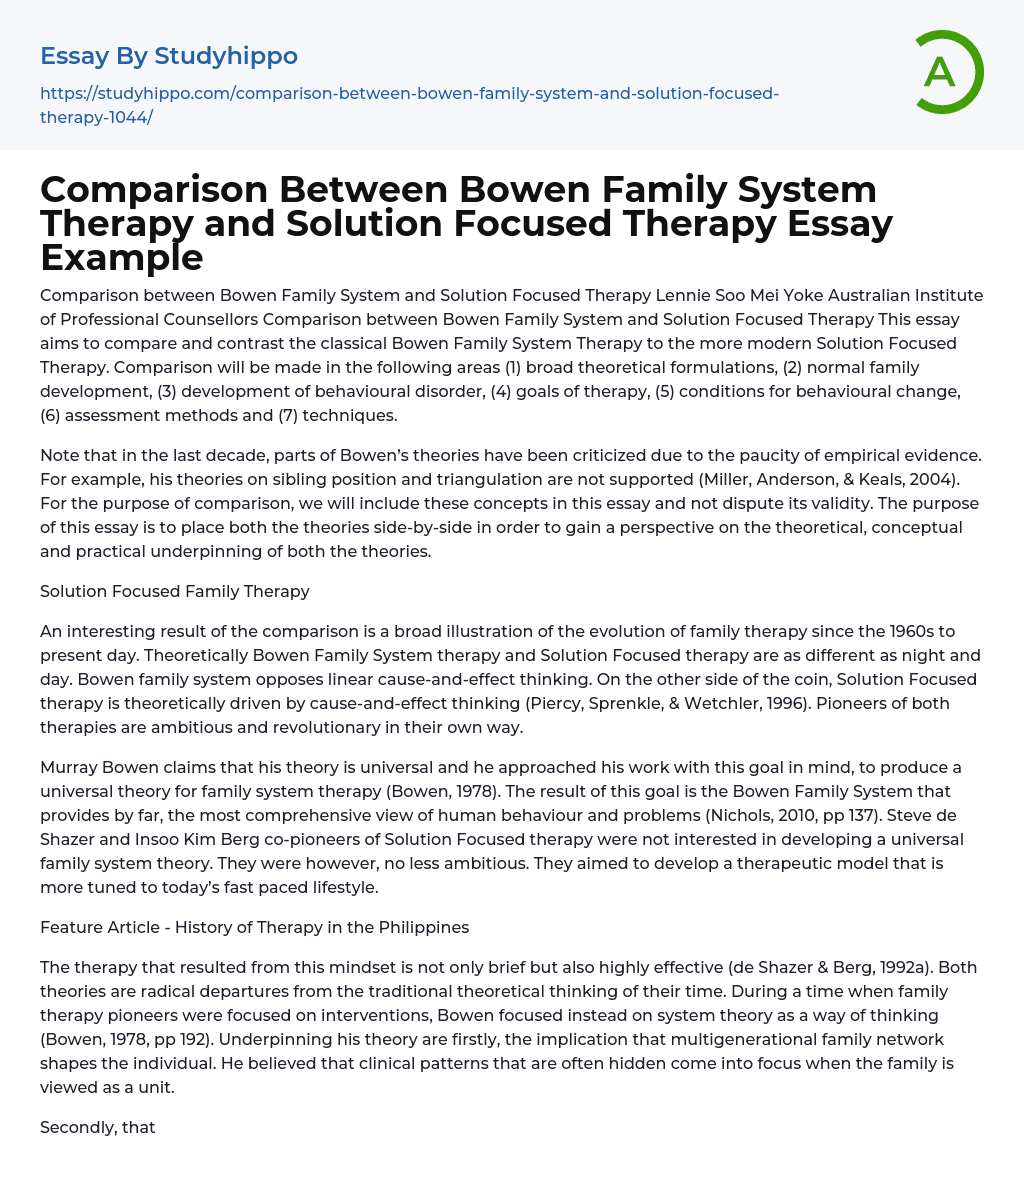 Comparison Between Bowen Family System Therapy and Solution Focused Therapy Essay Example